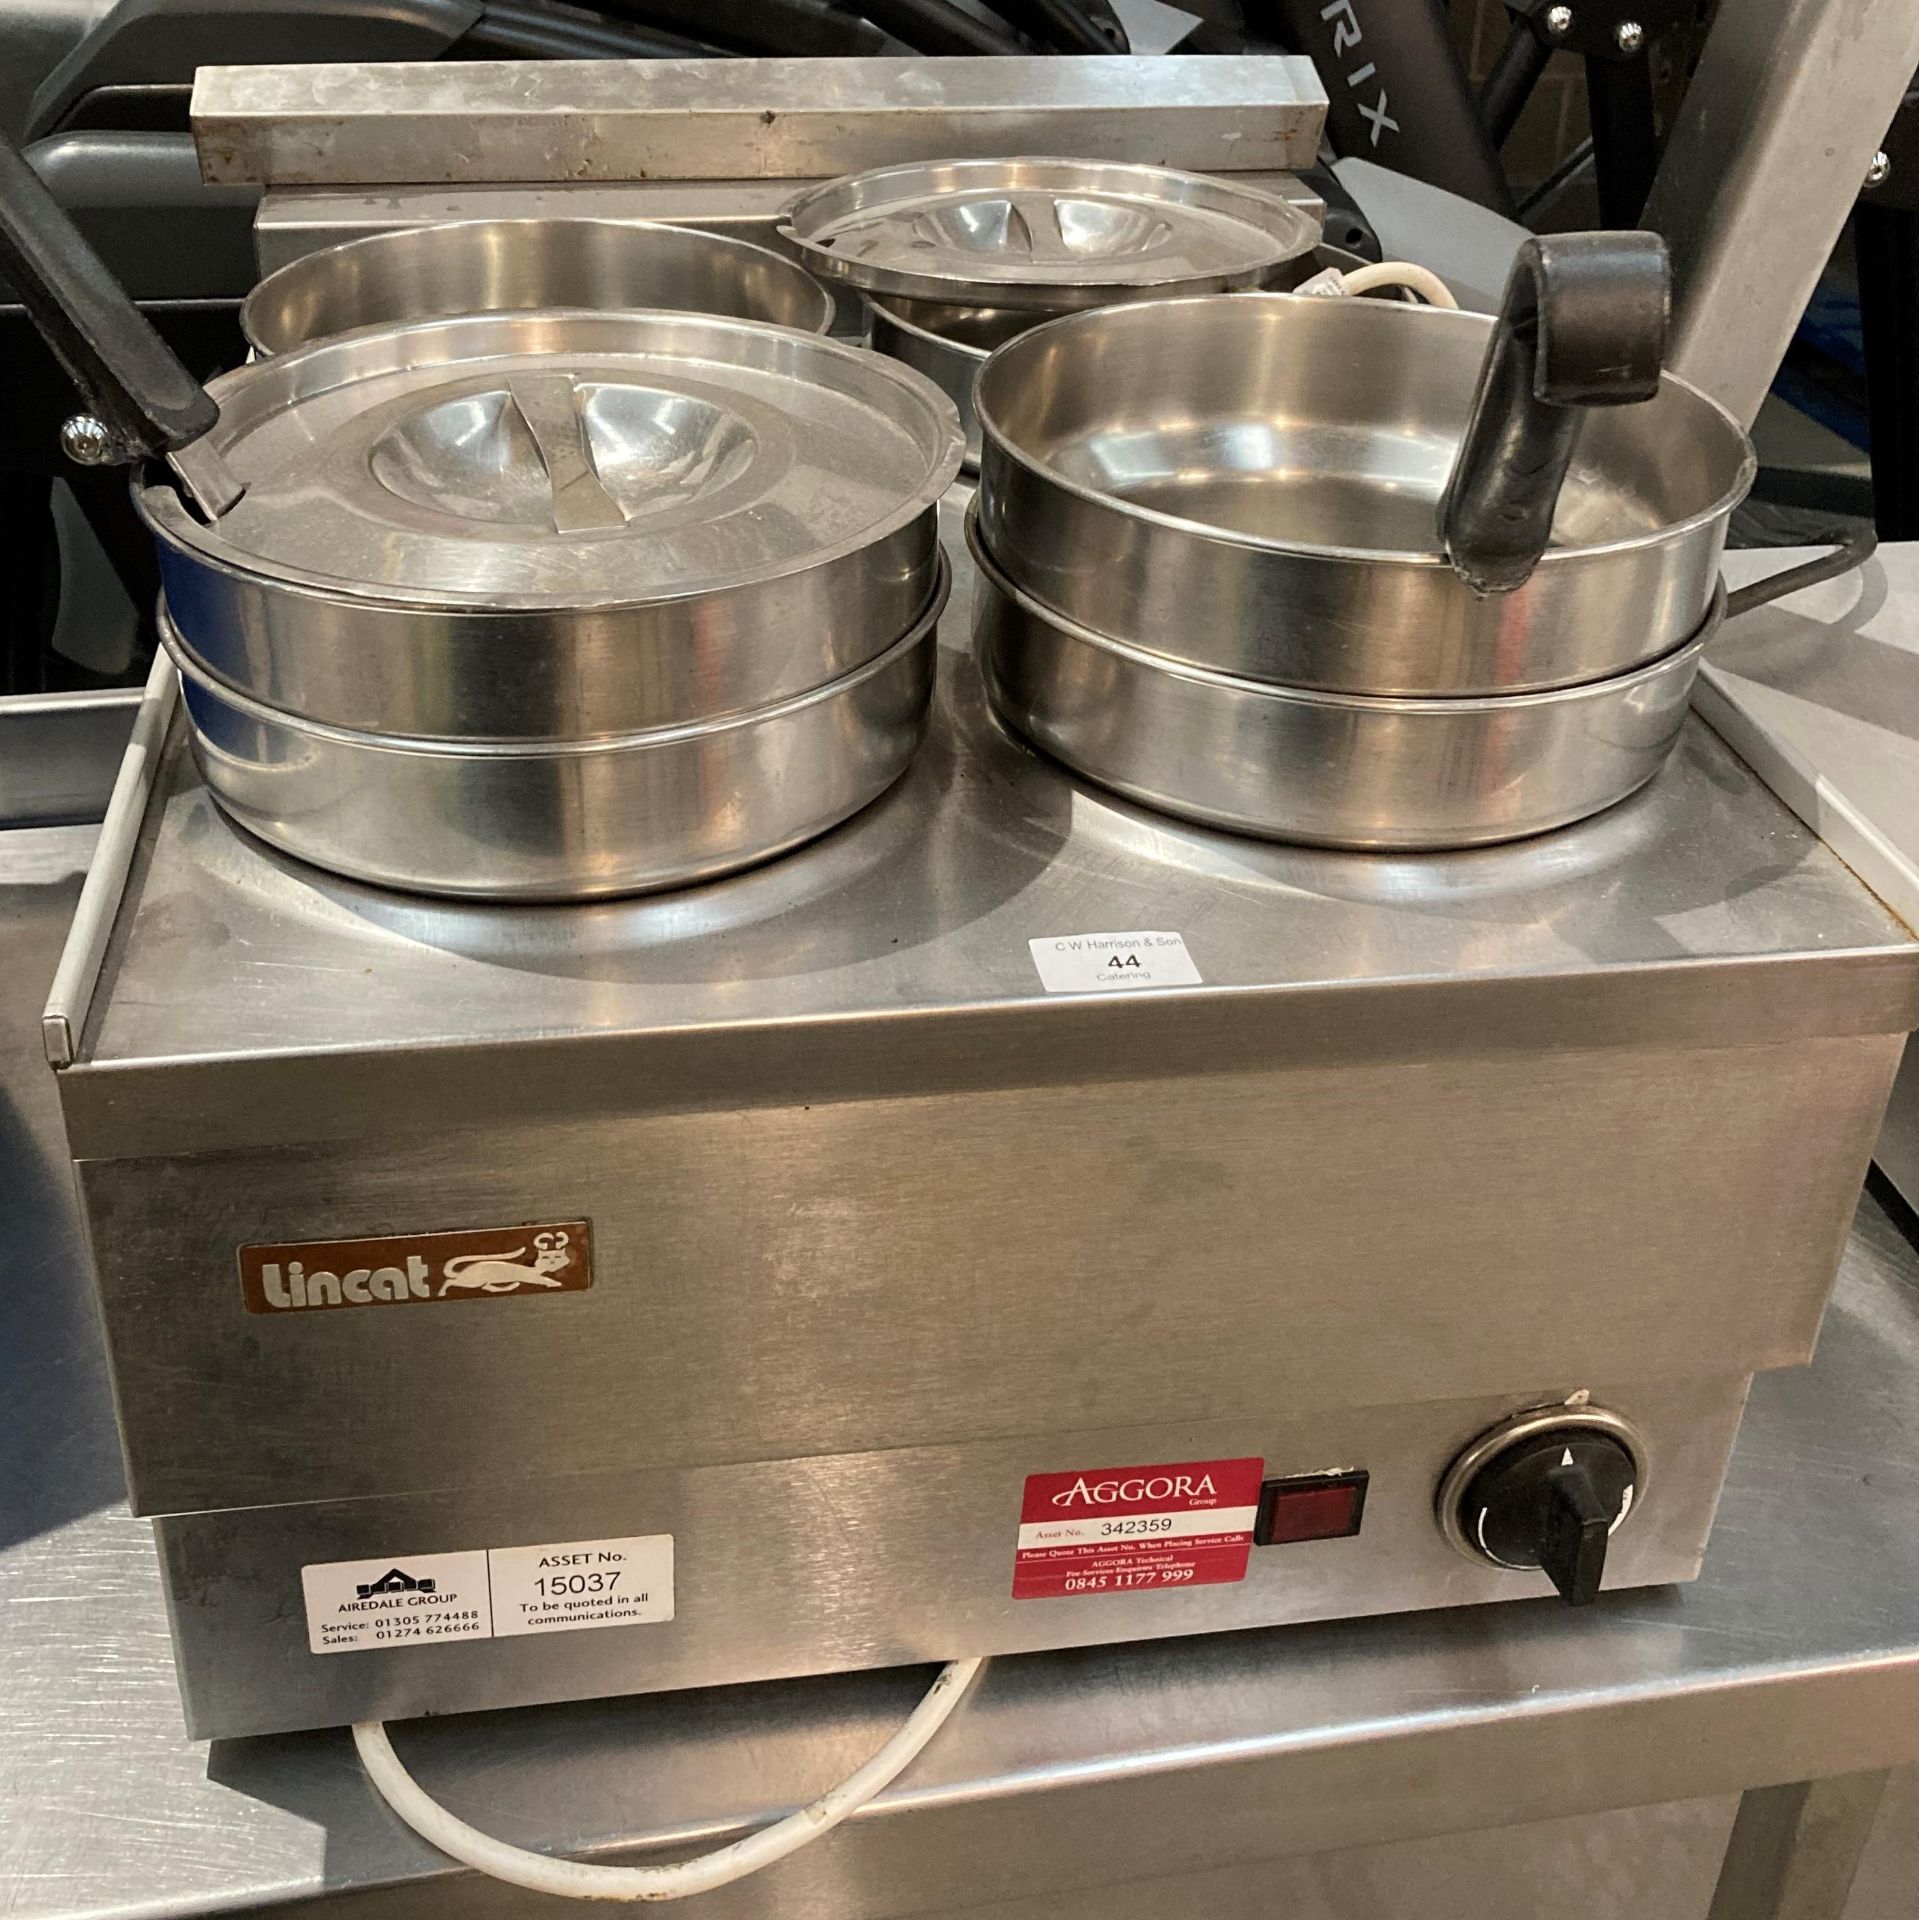 Lincat 4 pot stainless steel Bain Marie including post and lids 240v (failed PAT test)